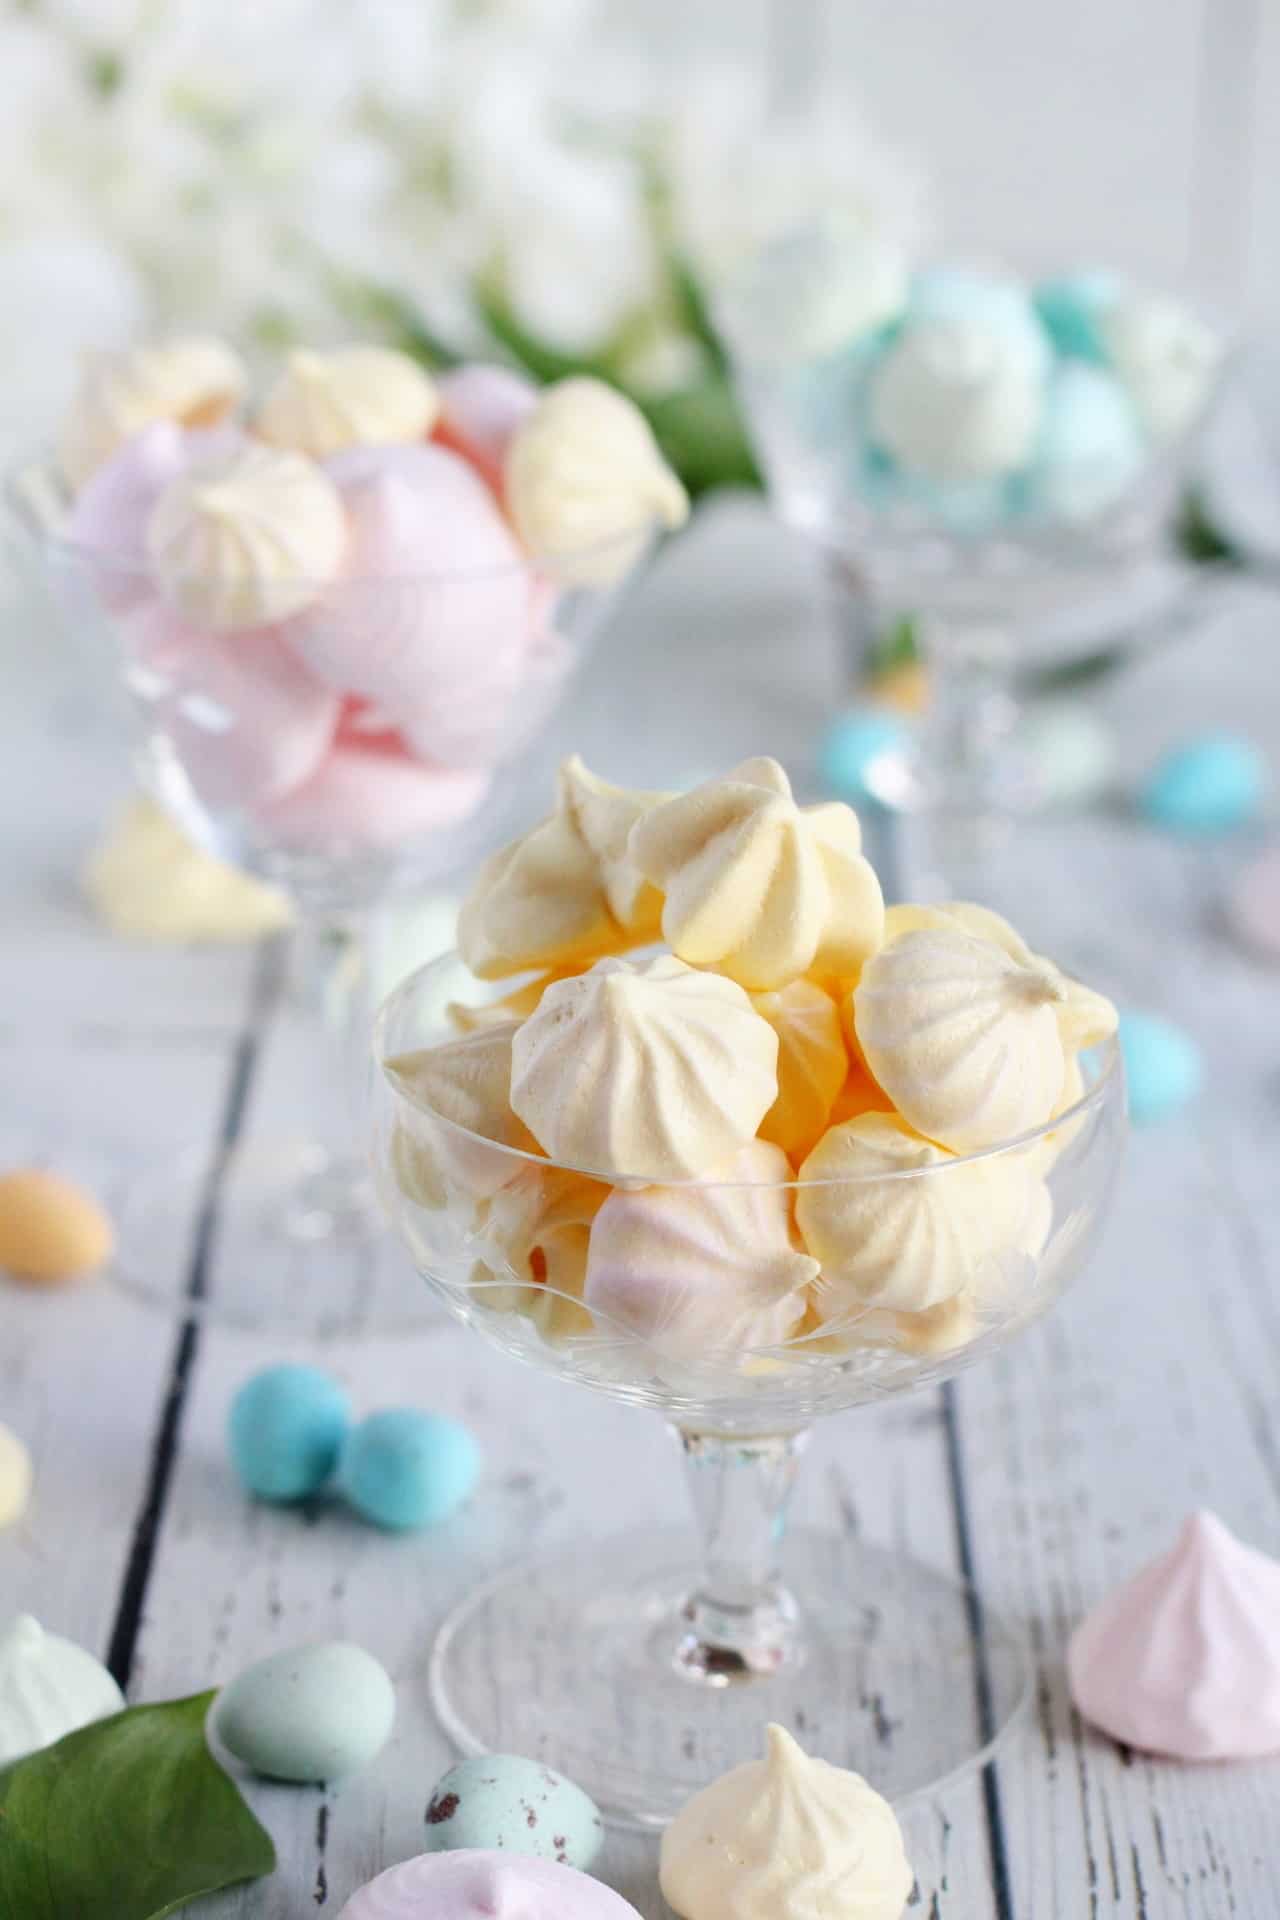 Yellow meringues in champagne glass with other meringues around of pastel colors